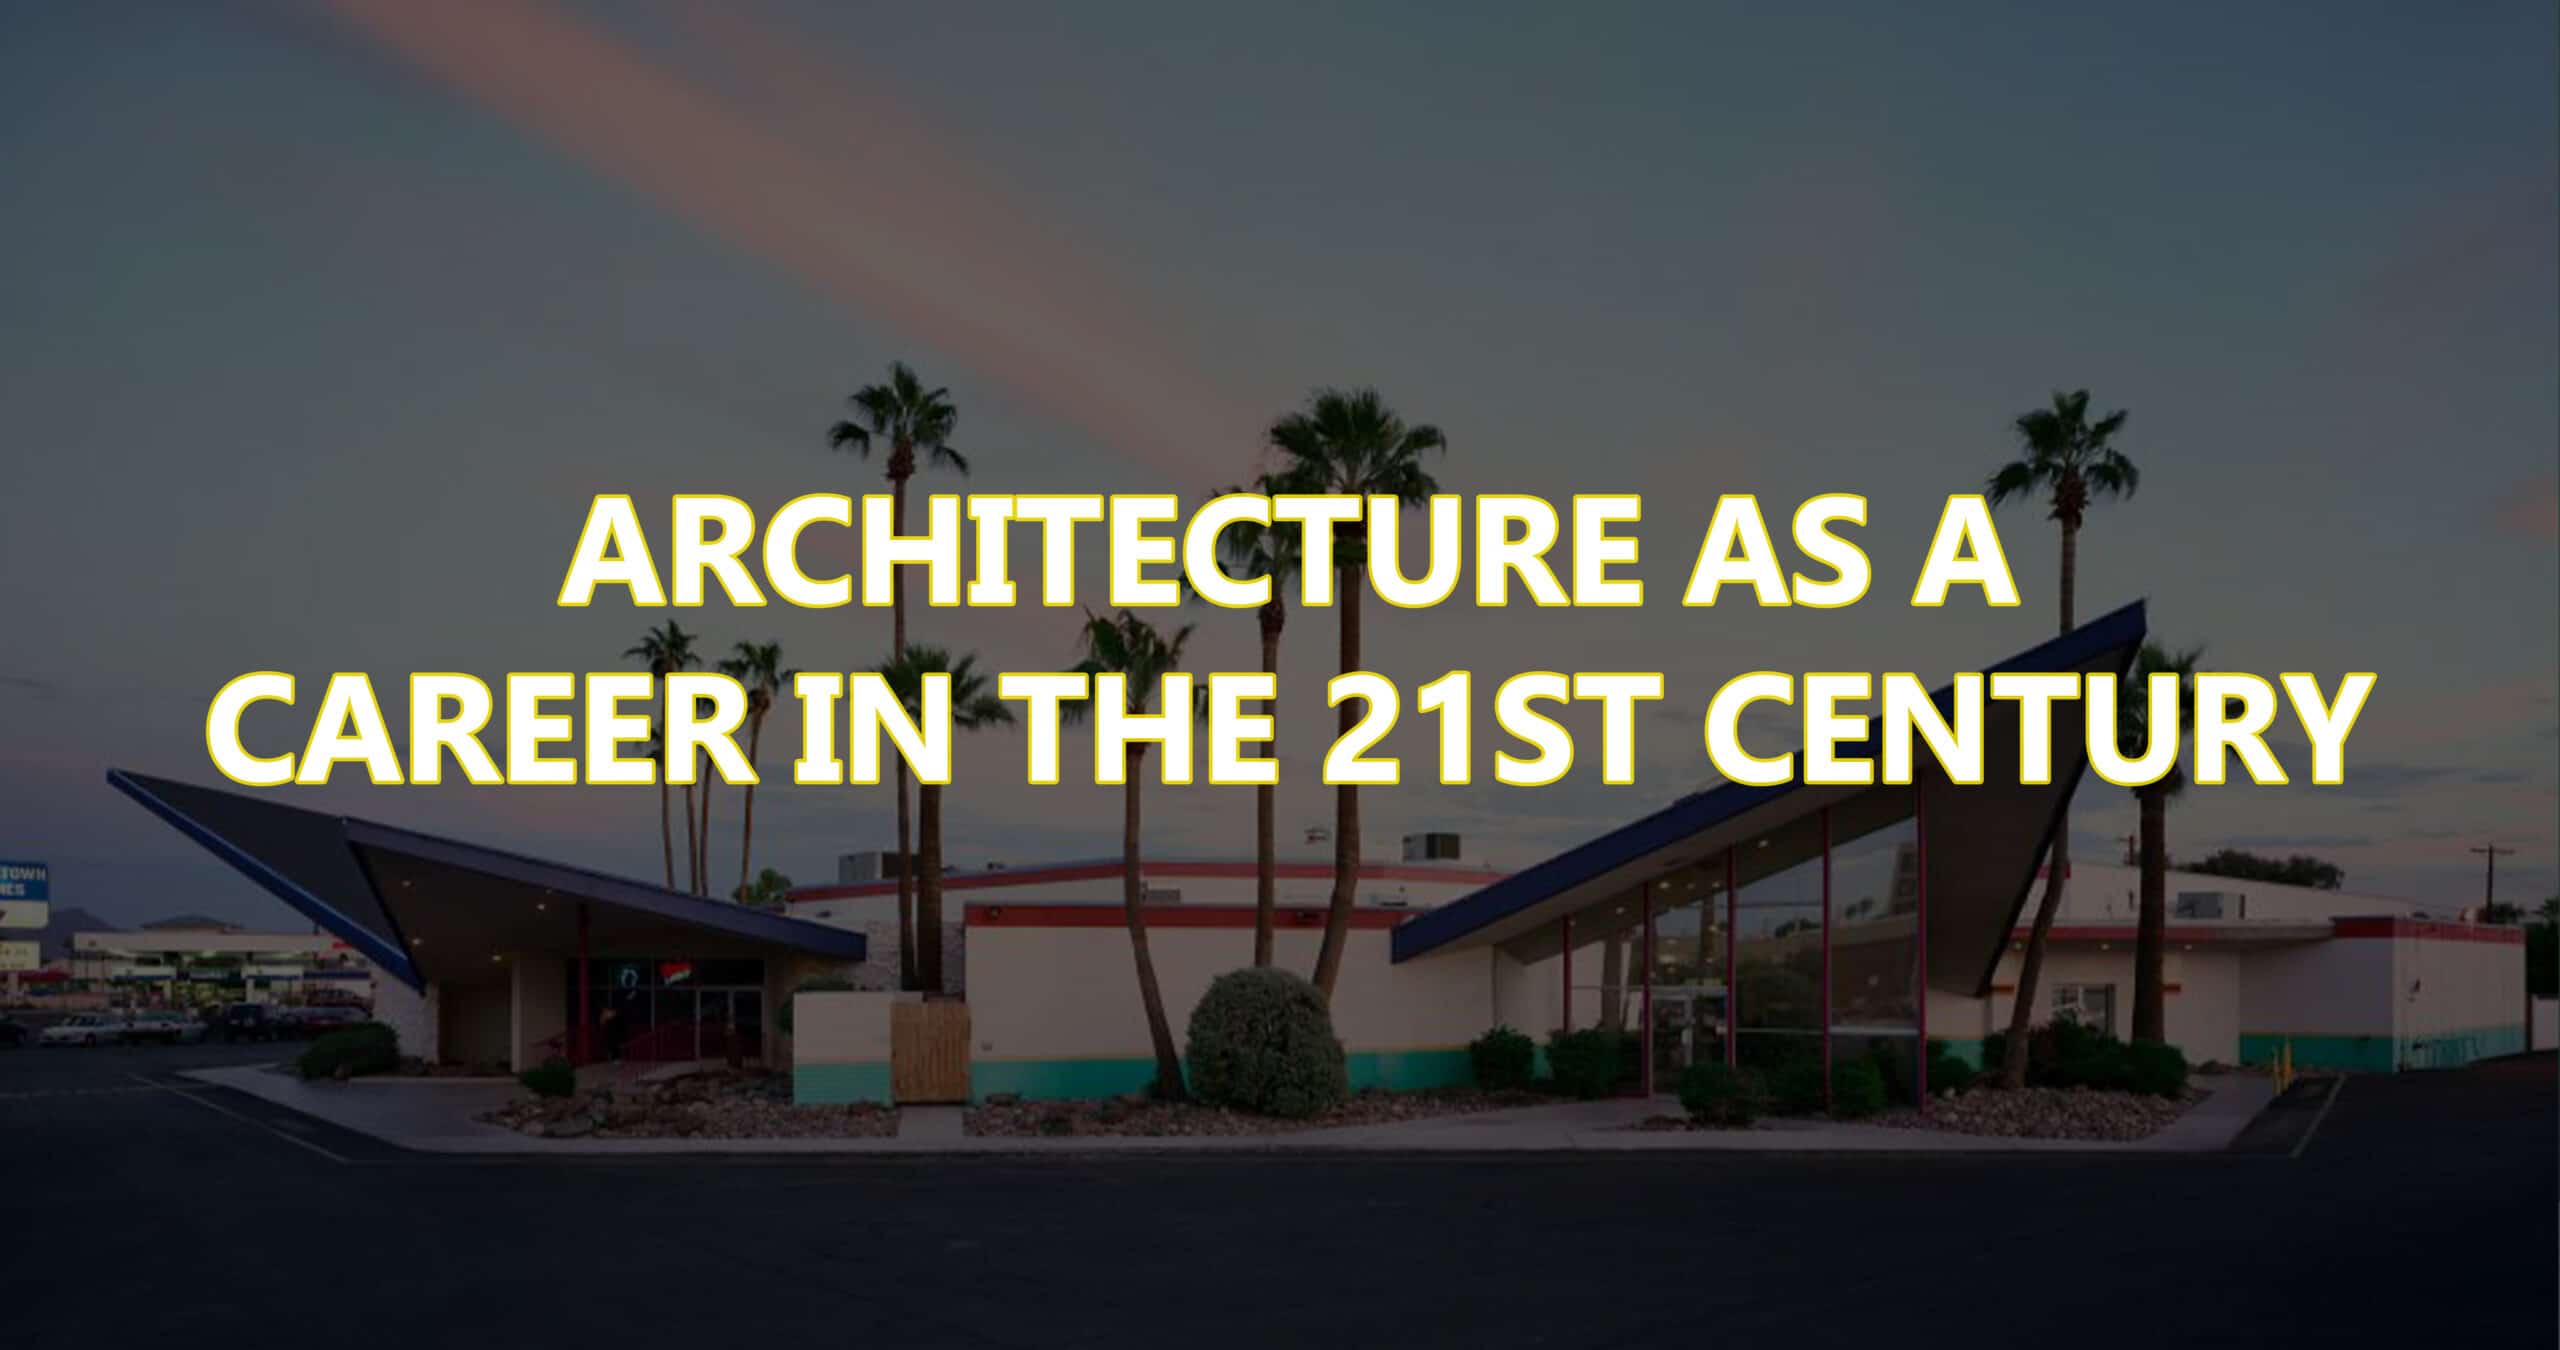 Architecture as a Career in the 21st Century